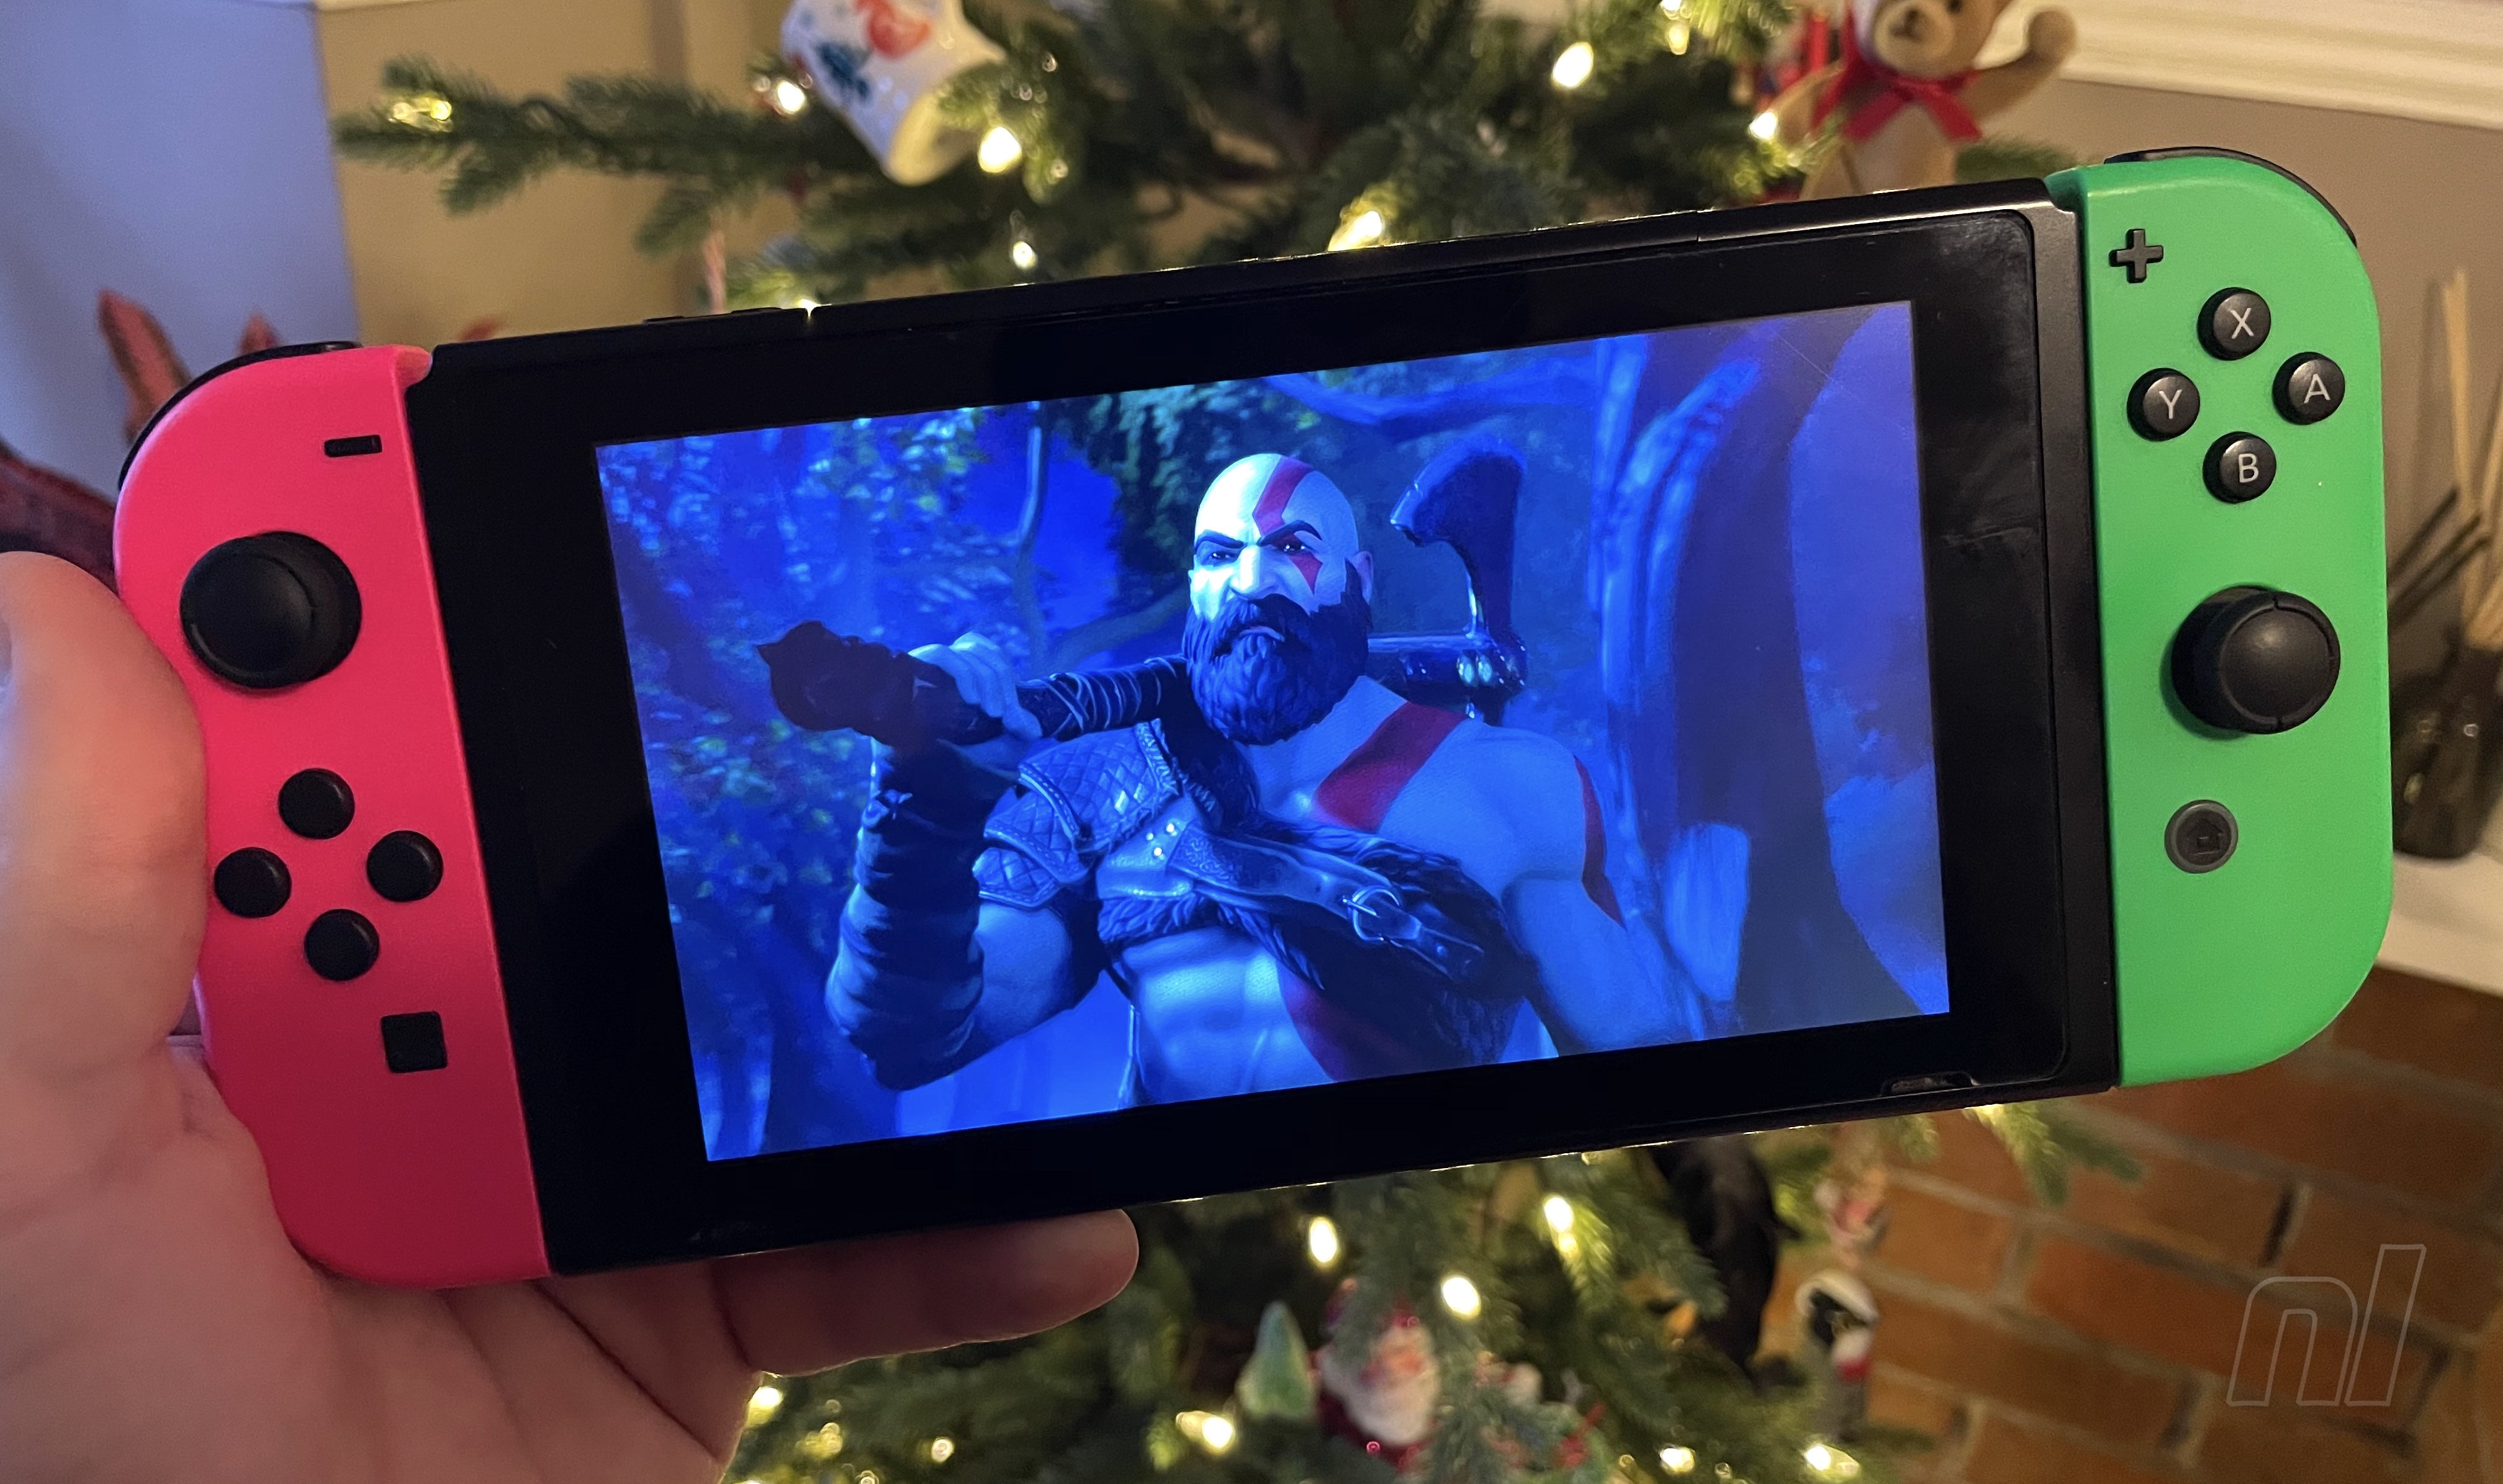 is shadow of war coming to switch